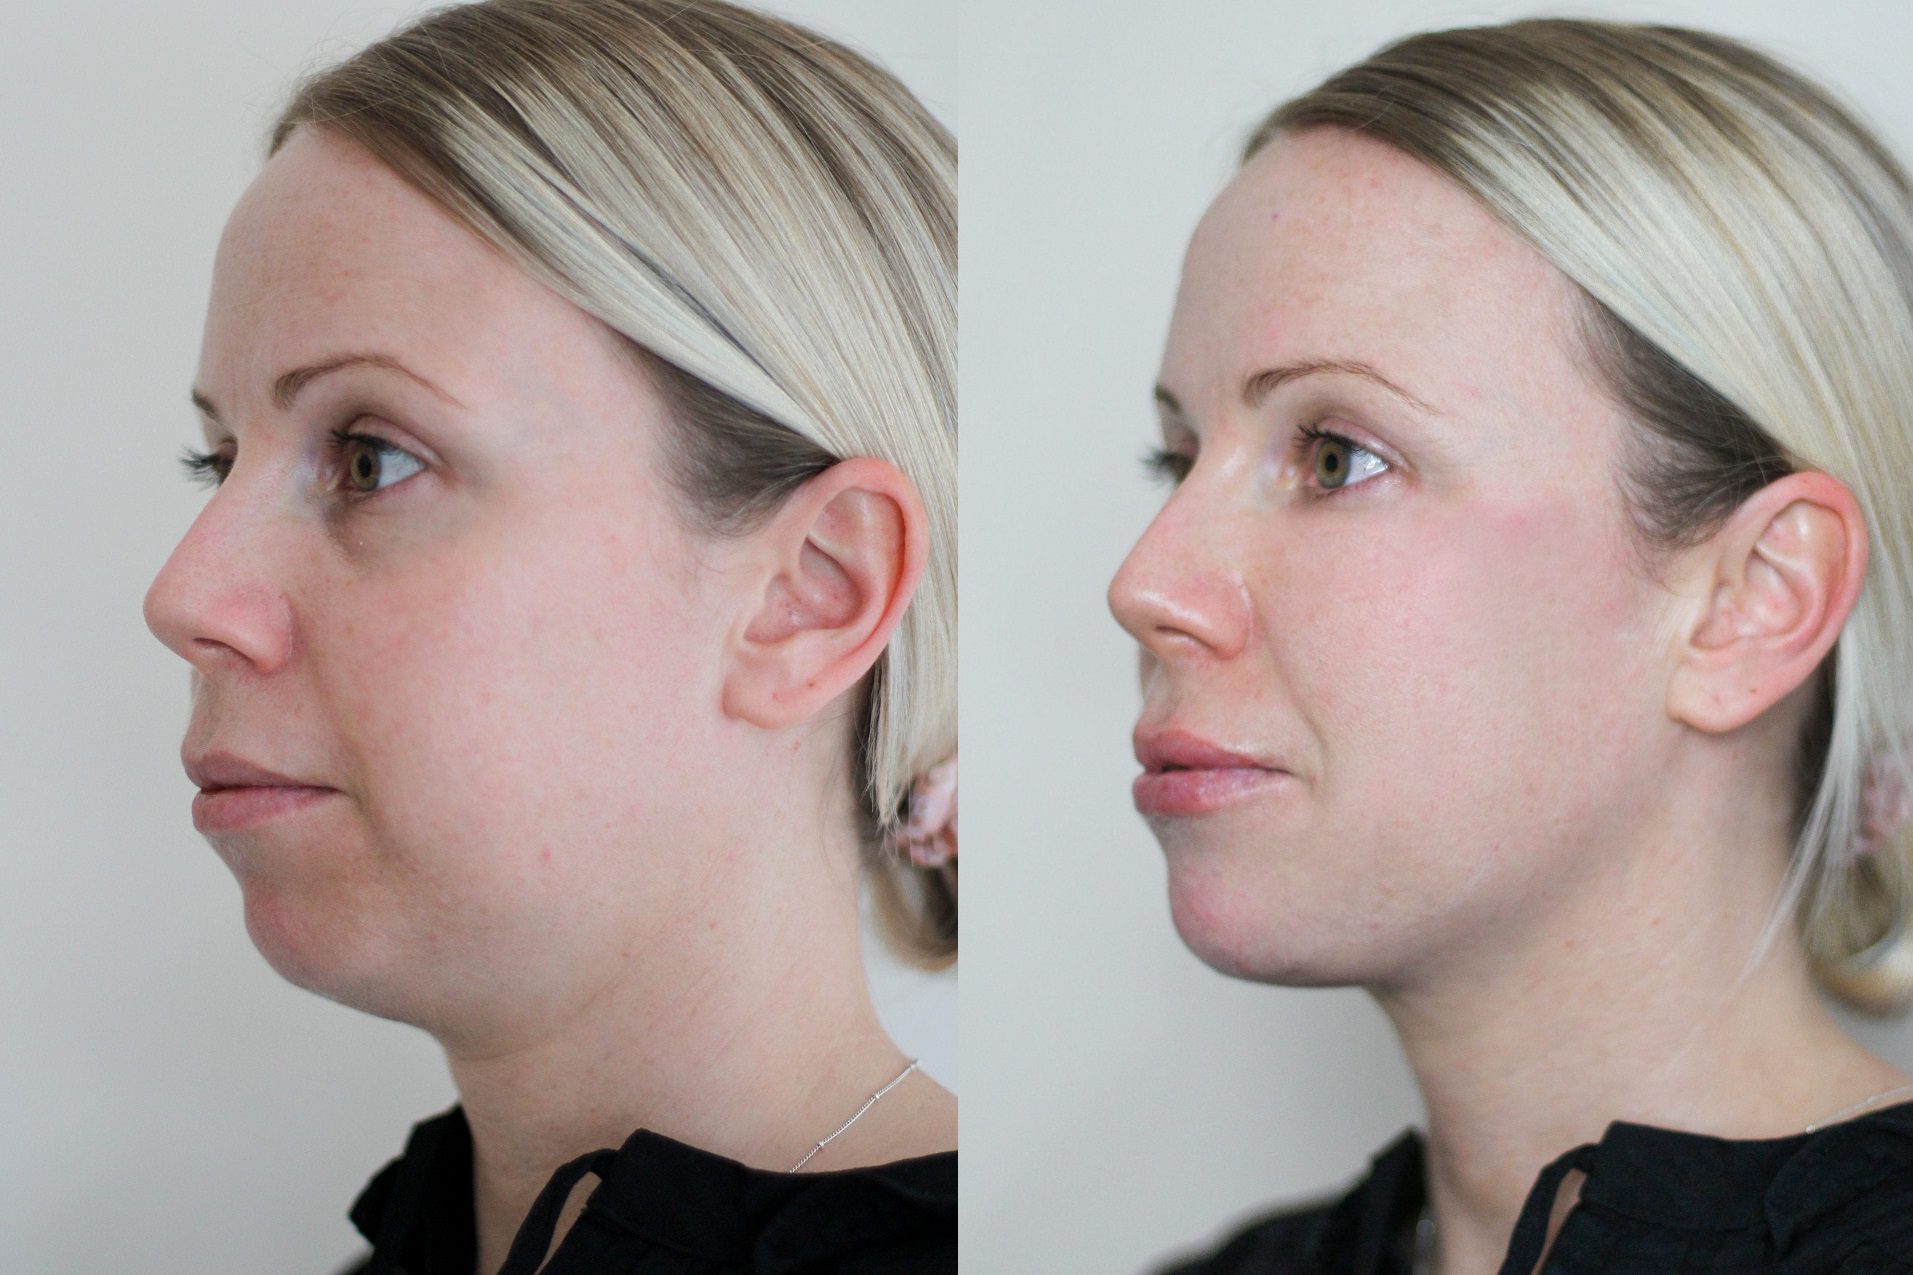 Filler for receding chin, chin augmentation with fillers before and after